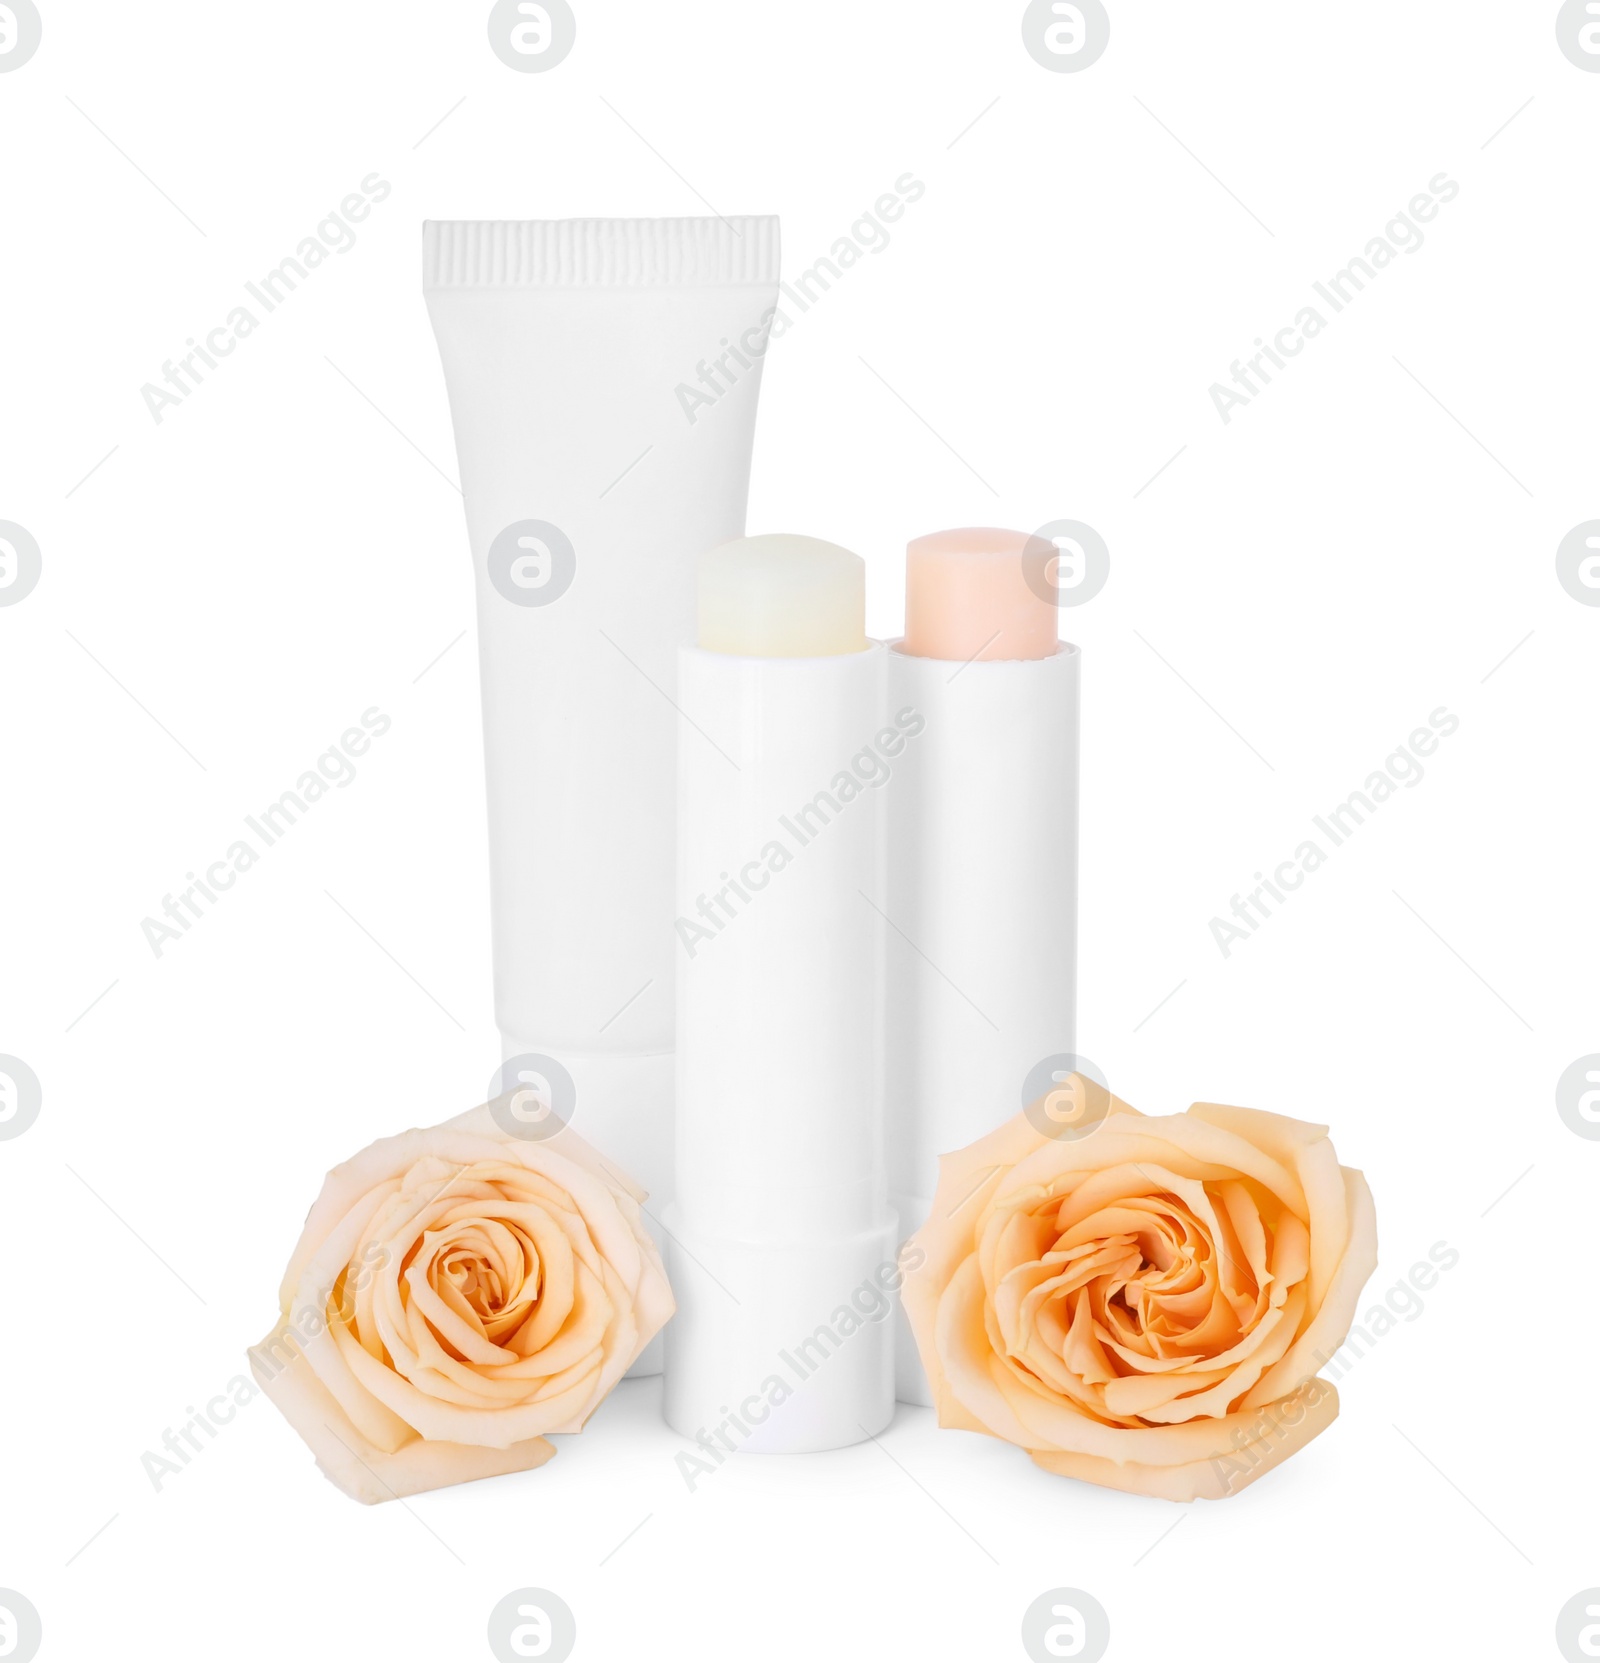 Photo of Lip balms and roses isolated on white